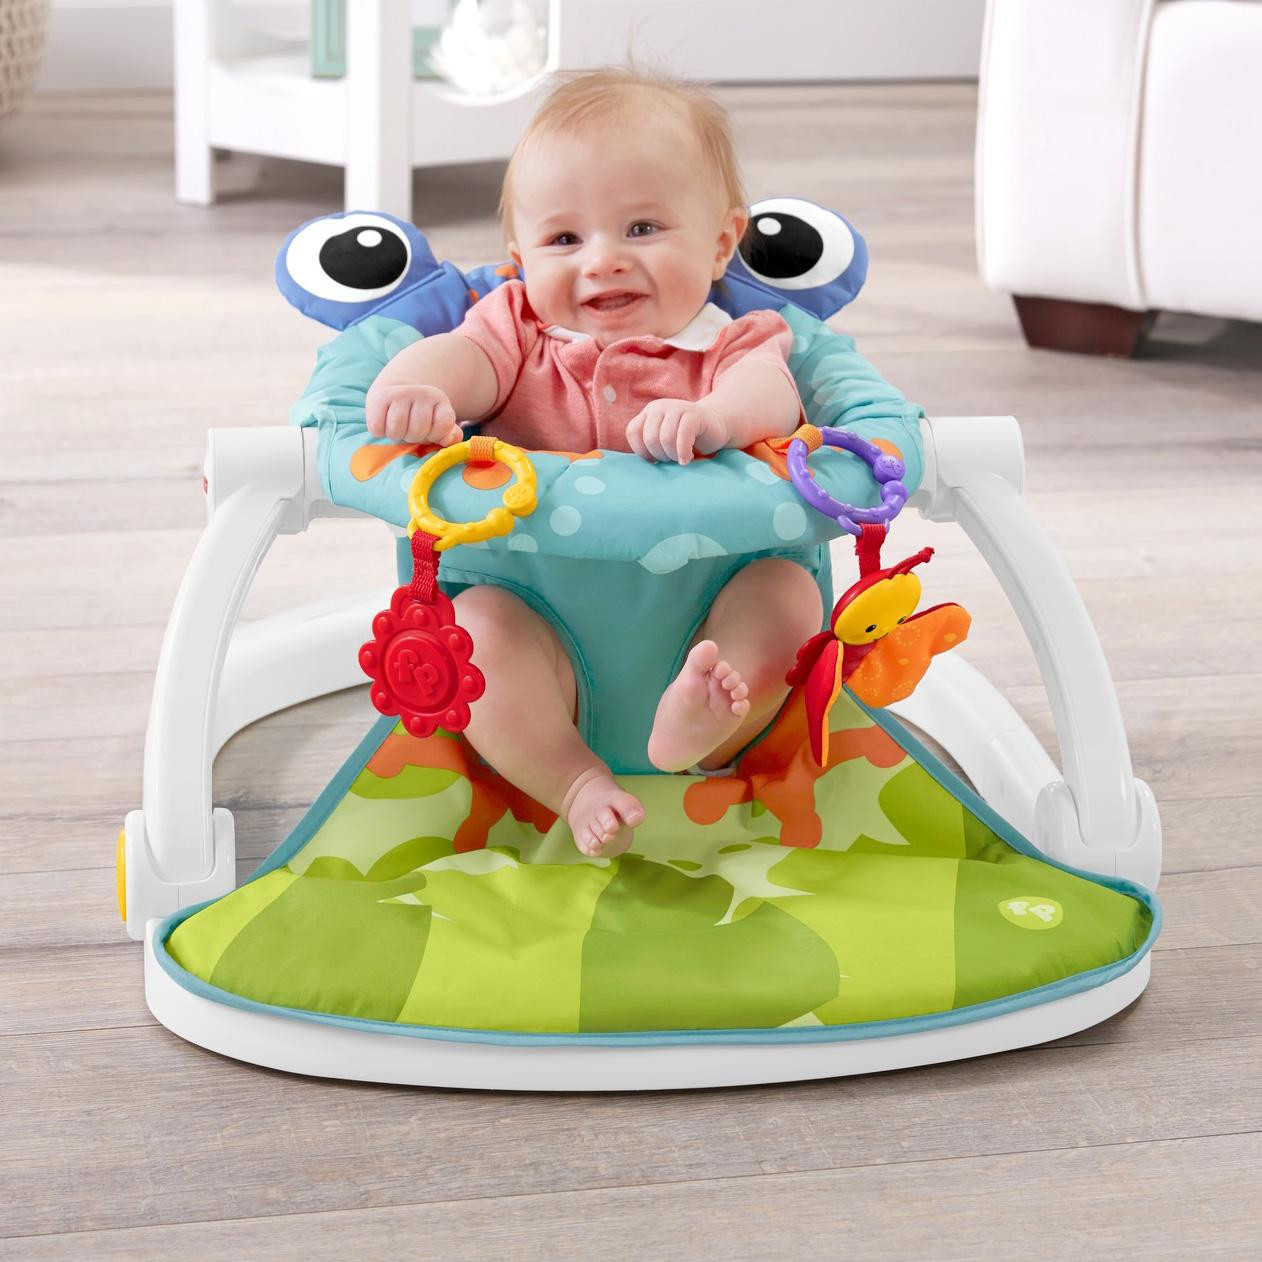 Best ideas about Baby Floor Seat
. Save or Pin Amazon Fisher Price Sit Me Up Floor Seat Infant Now.